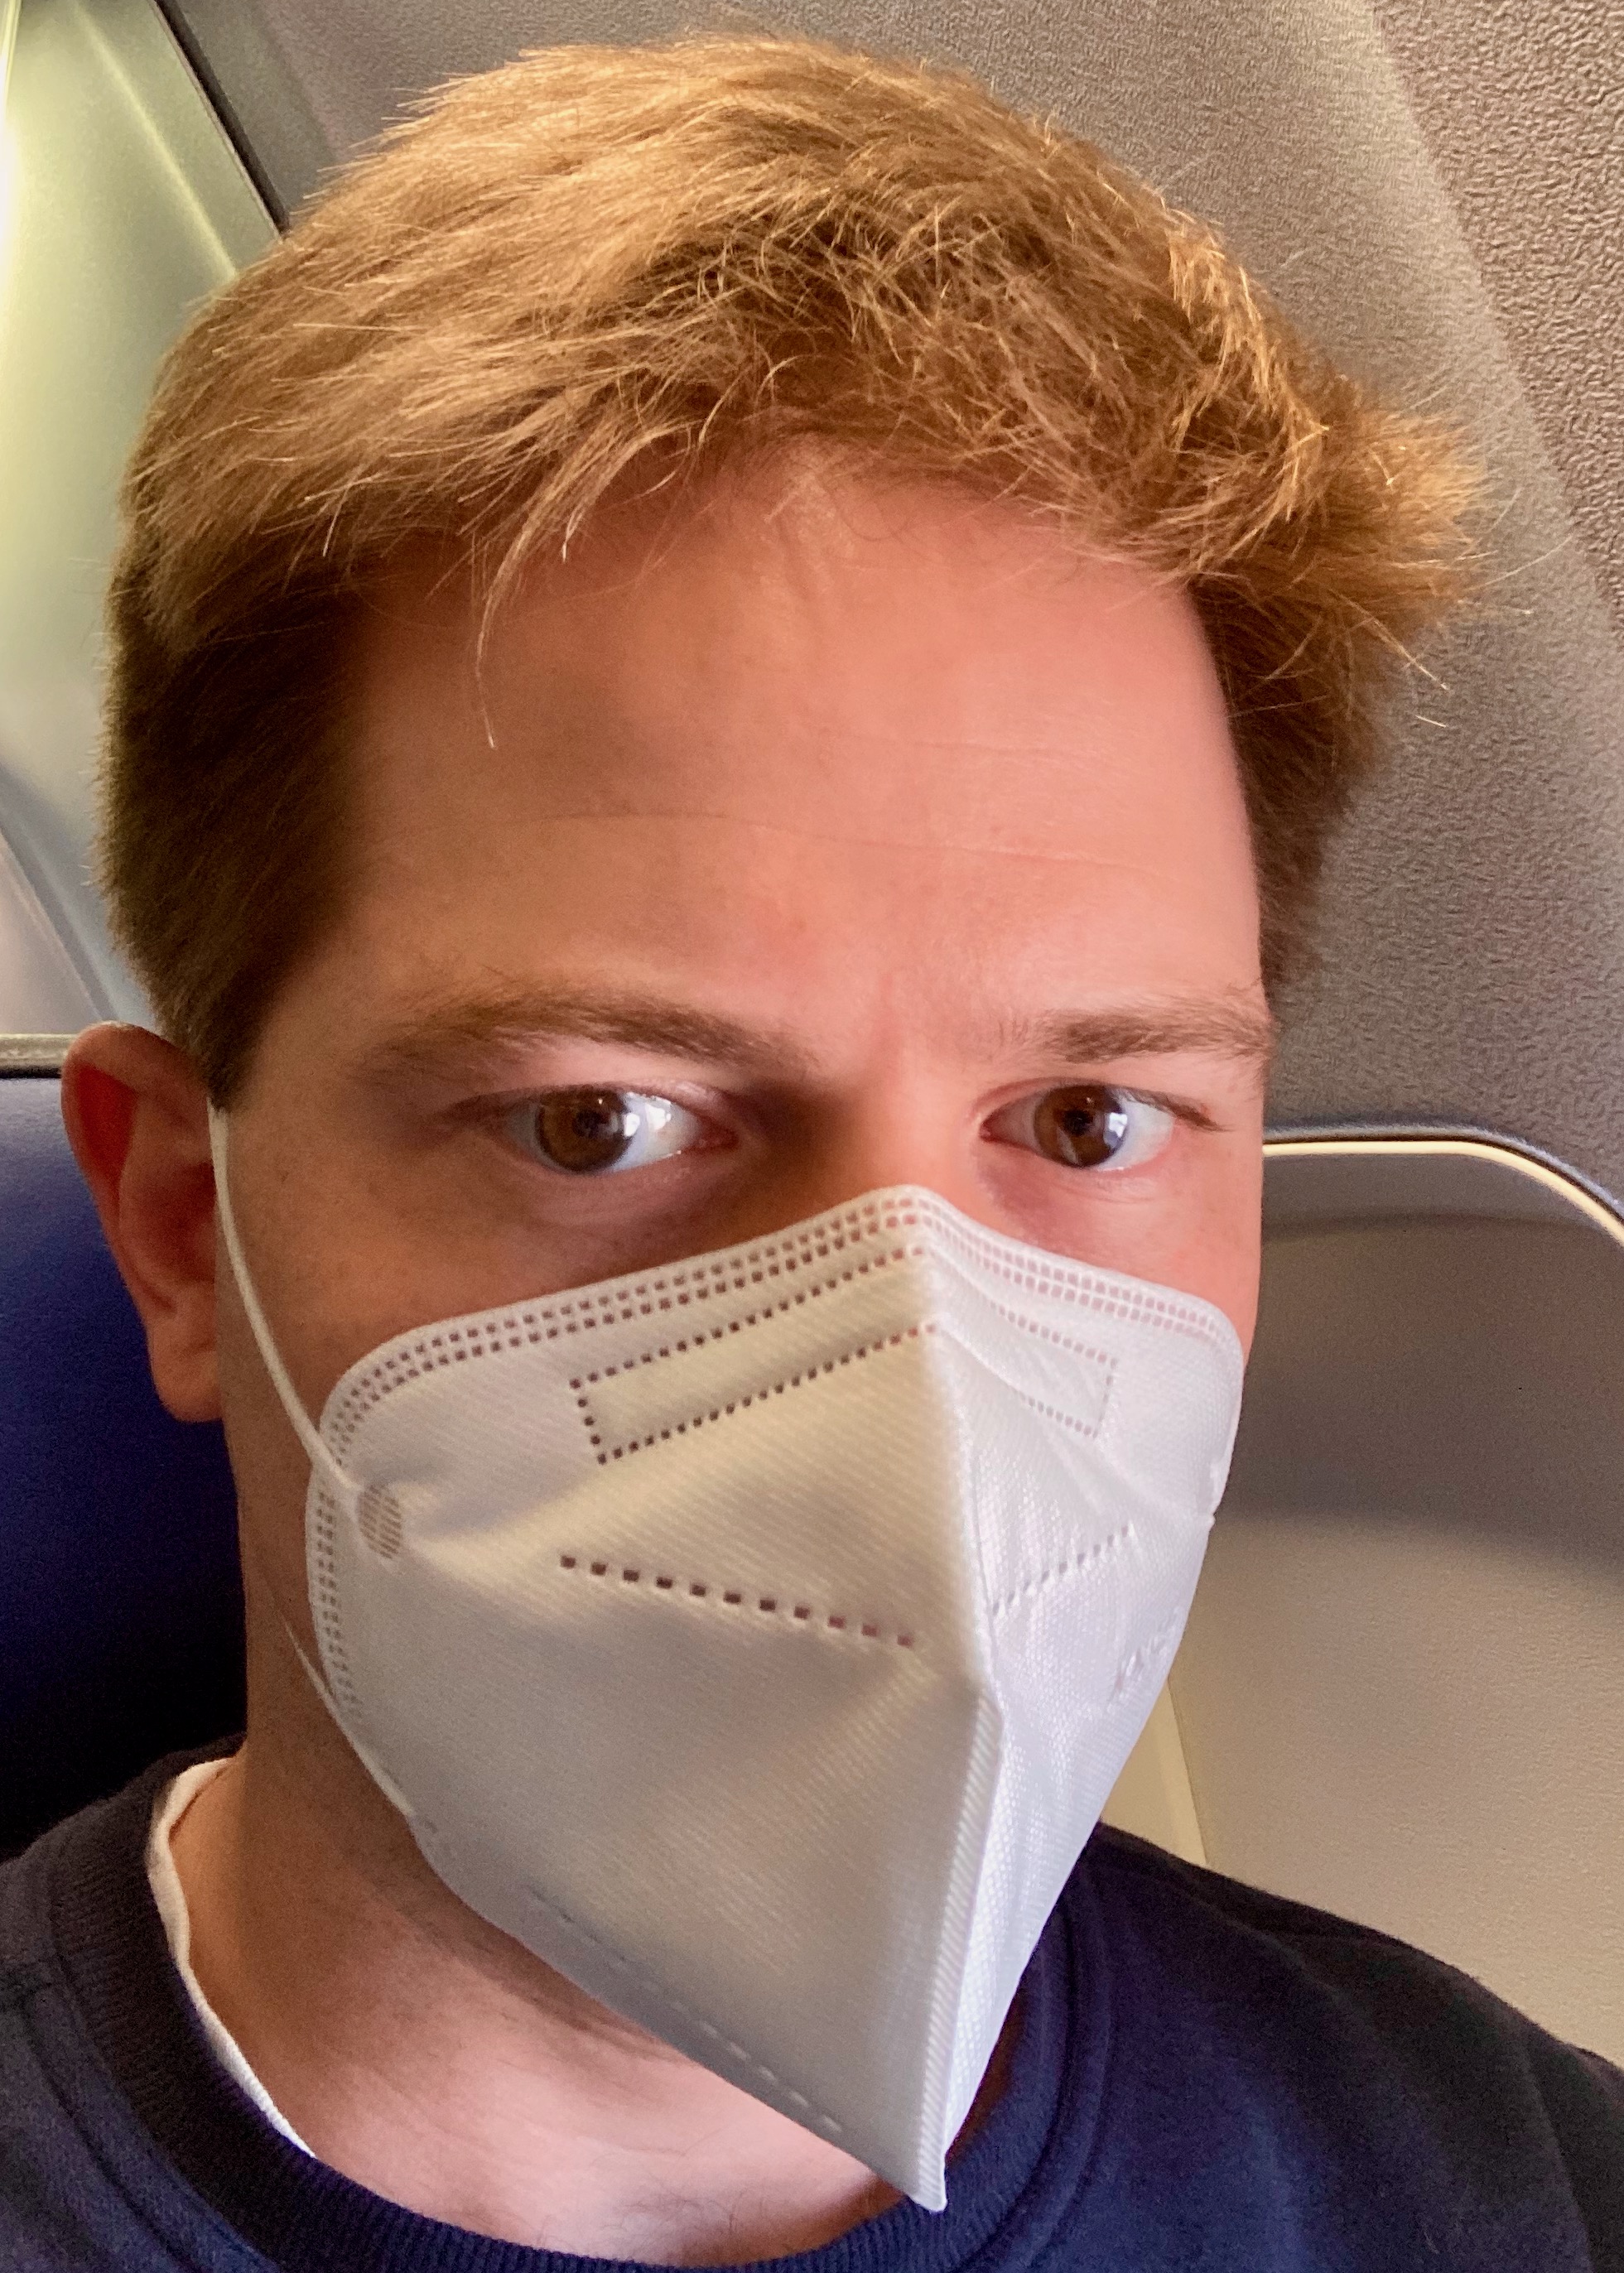 Me (Stephen Larew) wearing a snug N95 mask on the flight to Chicago O'Hare.